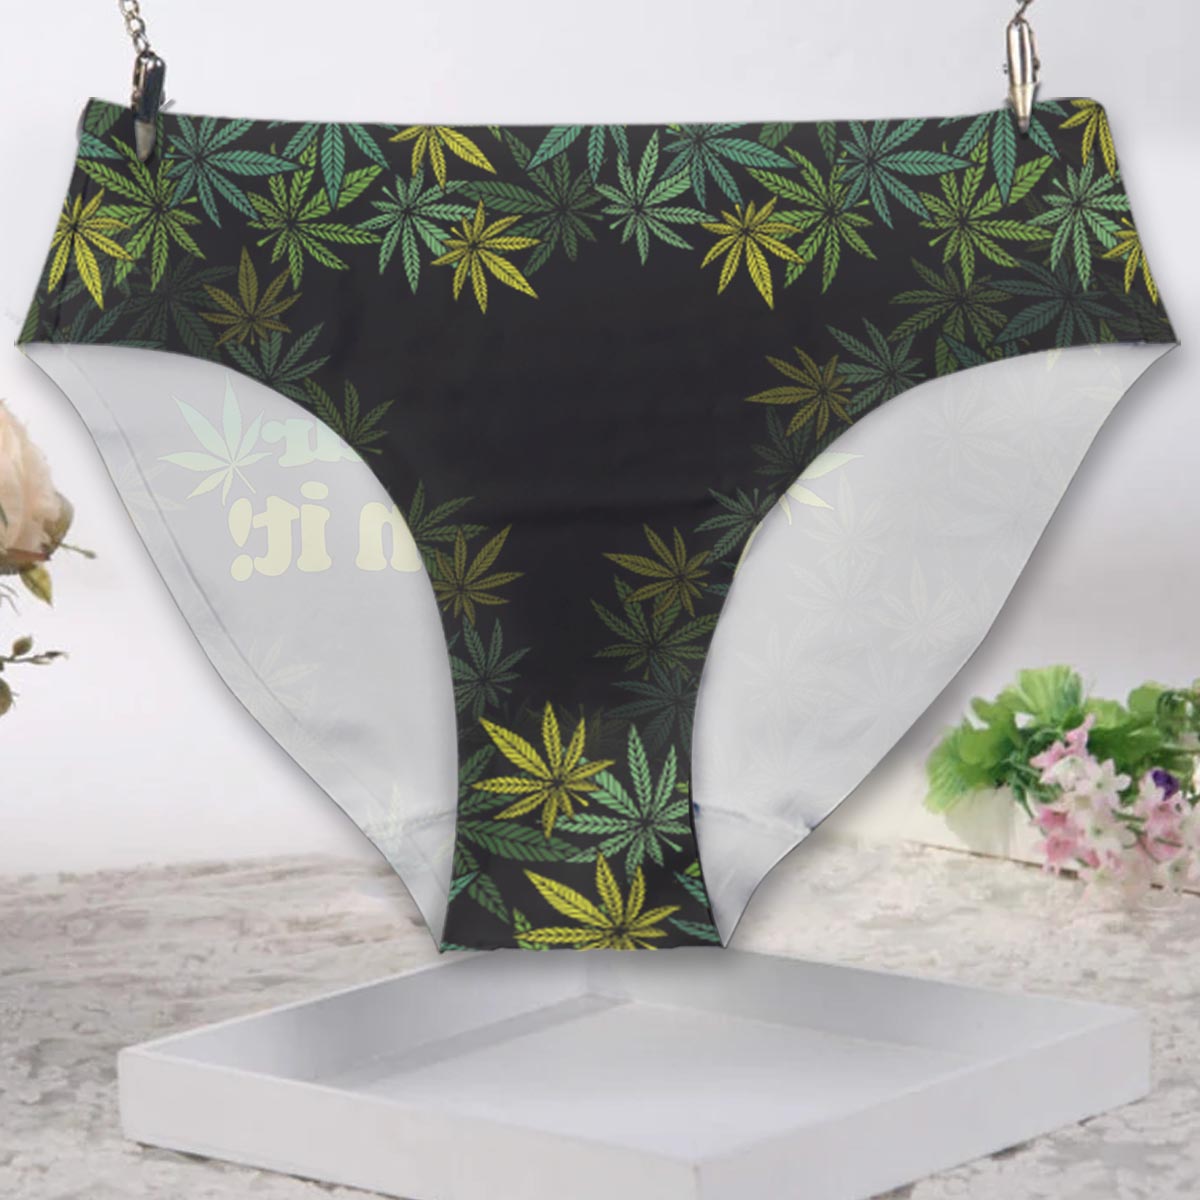 Roll Your Weed On It 4:20 - Personalized Weed Women Briefs